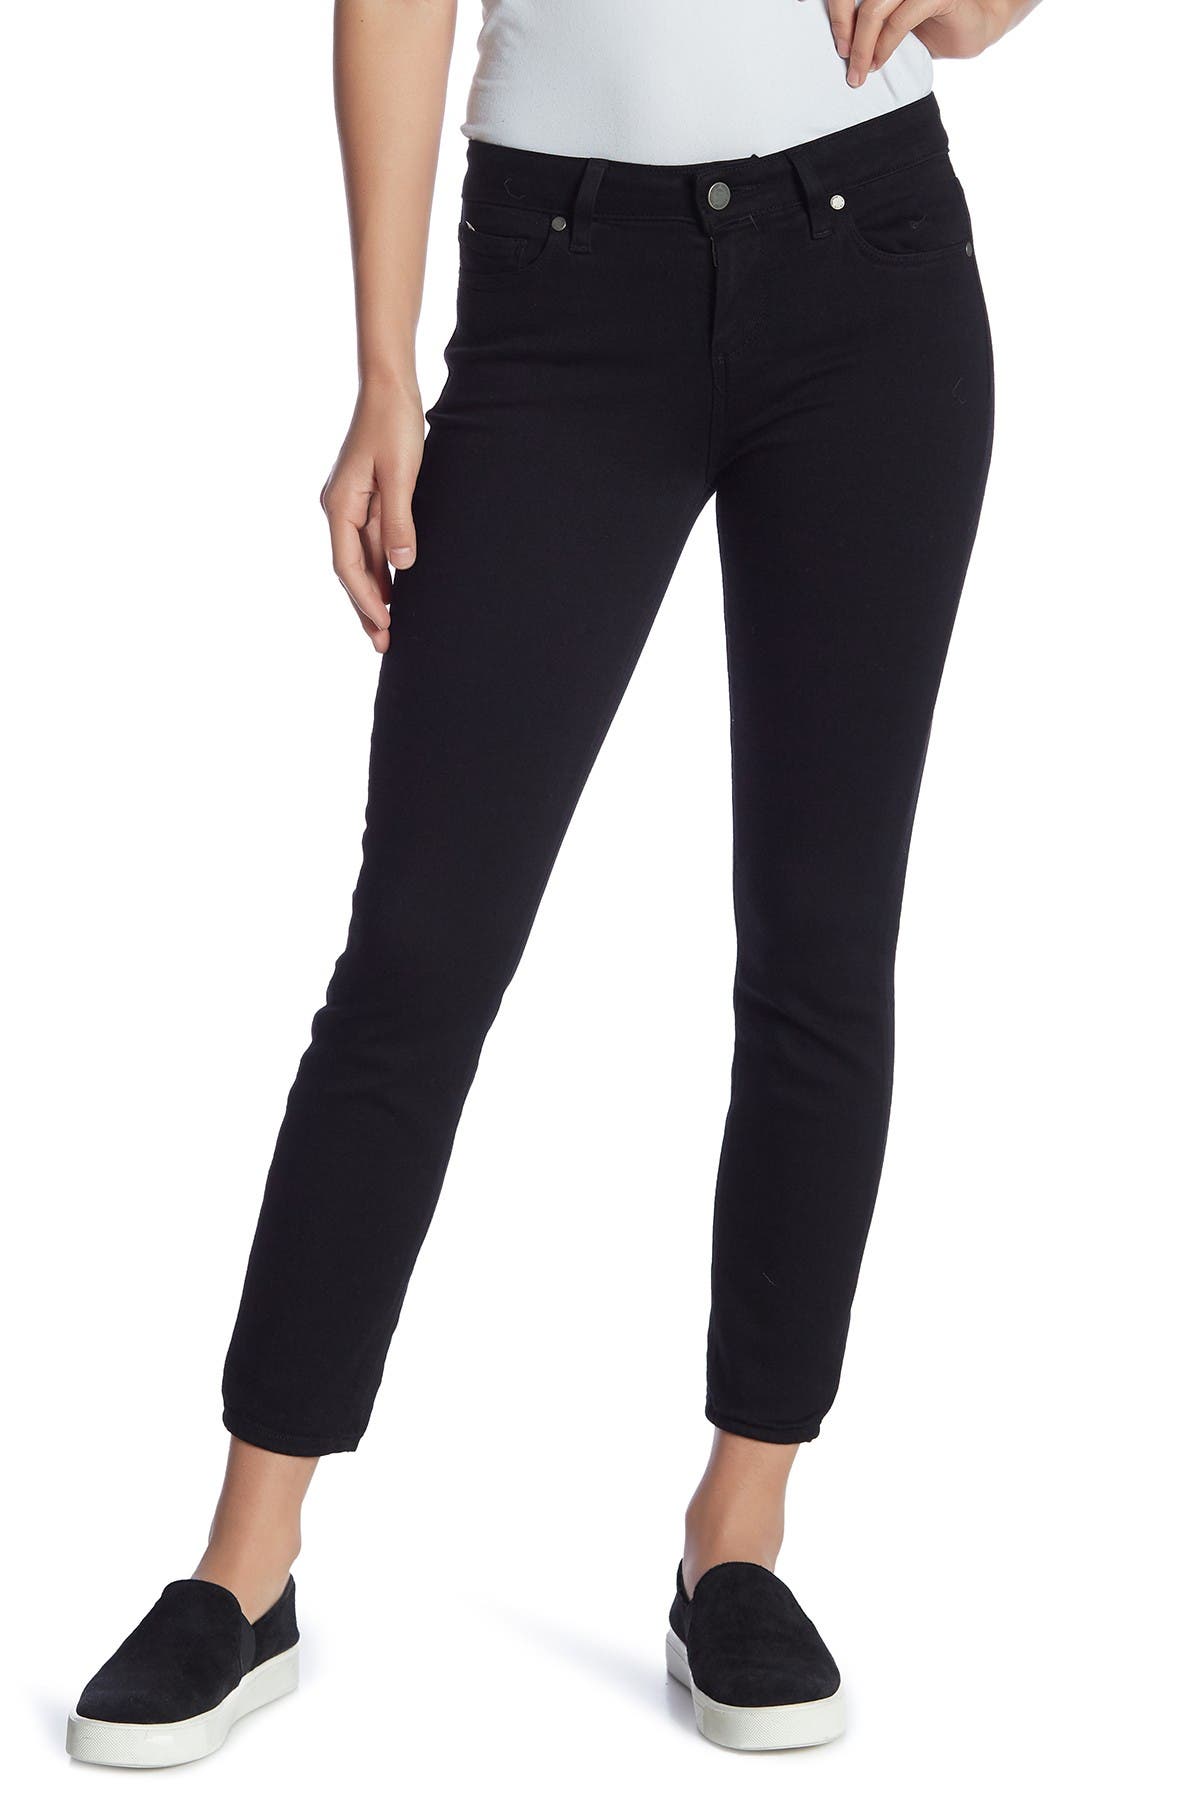 paige skinny ankle jeans